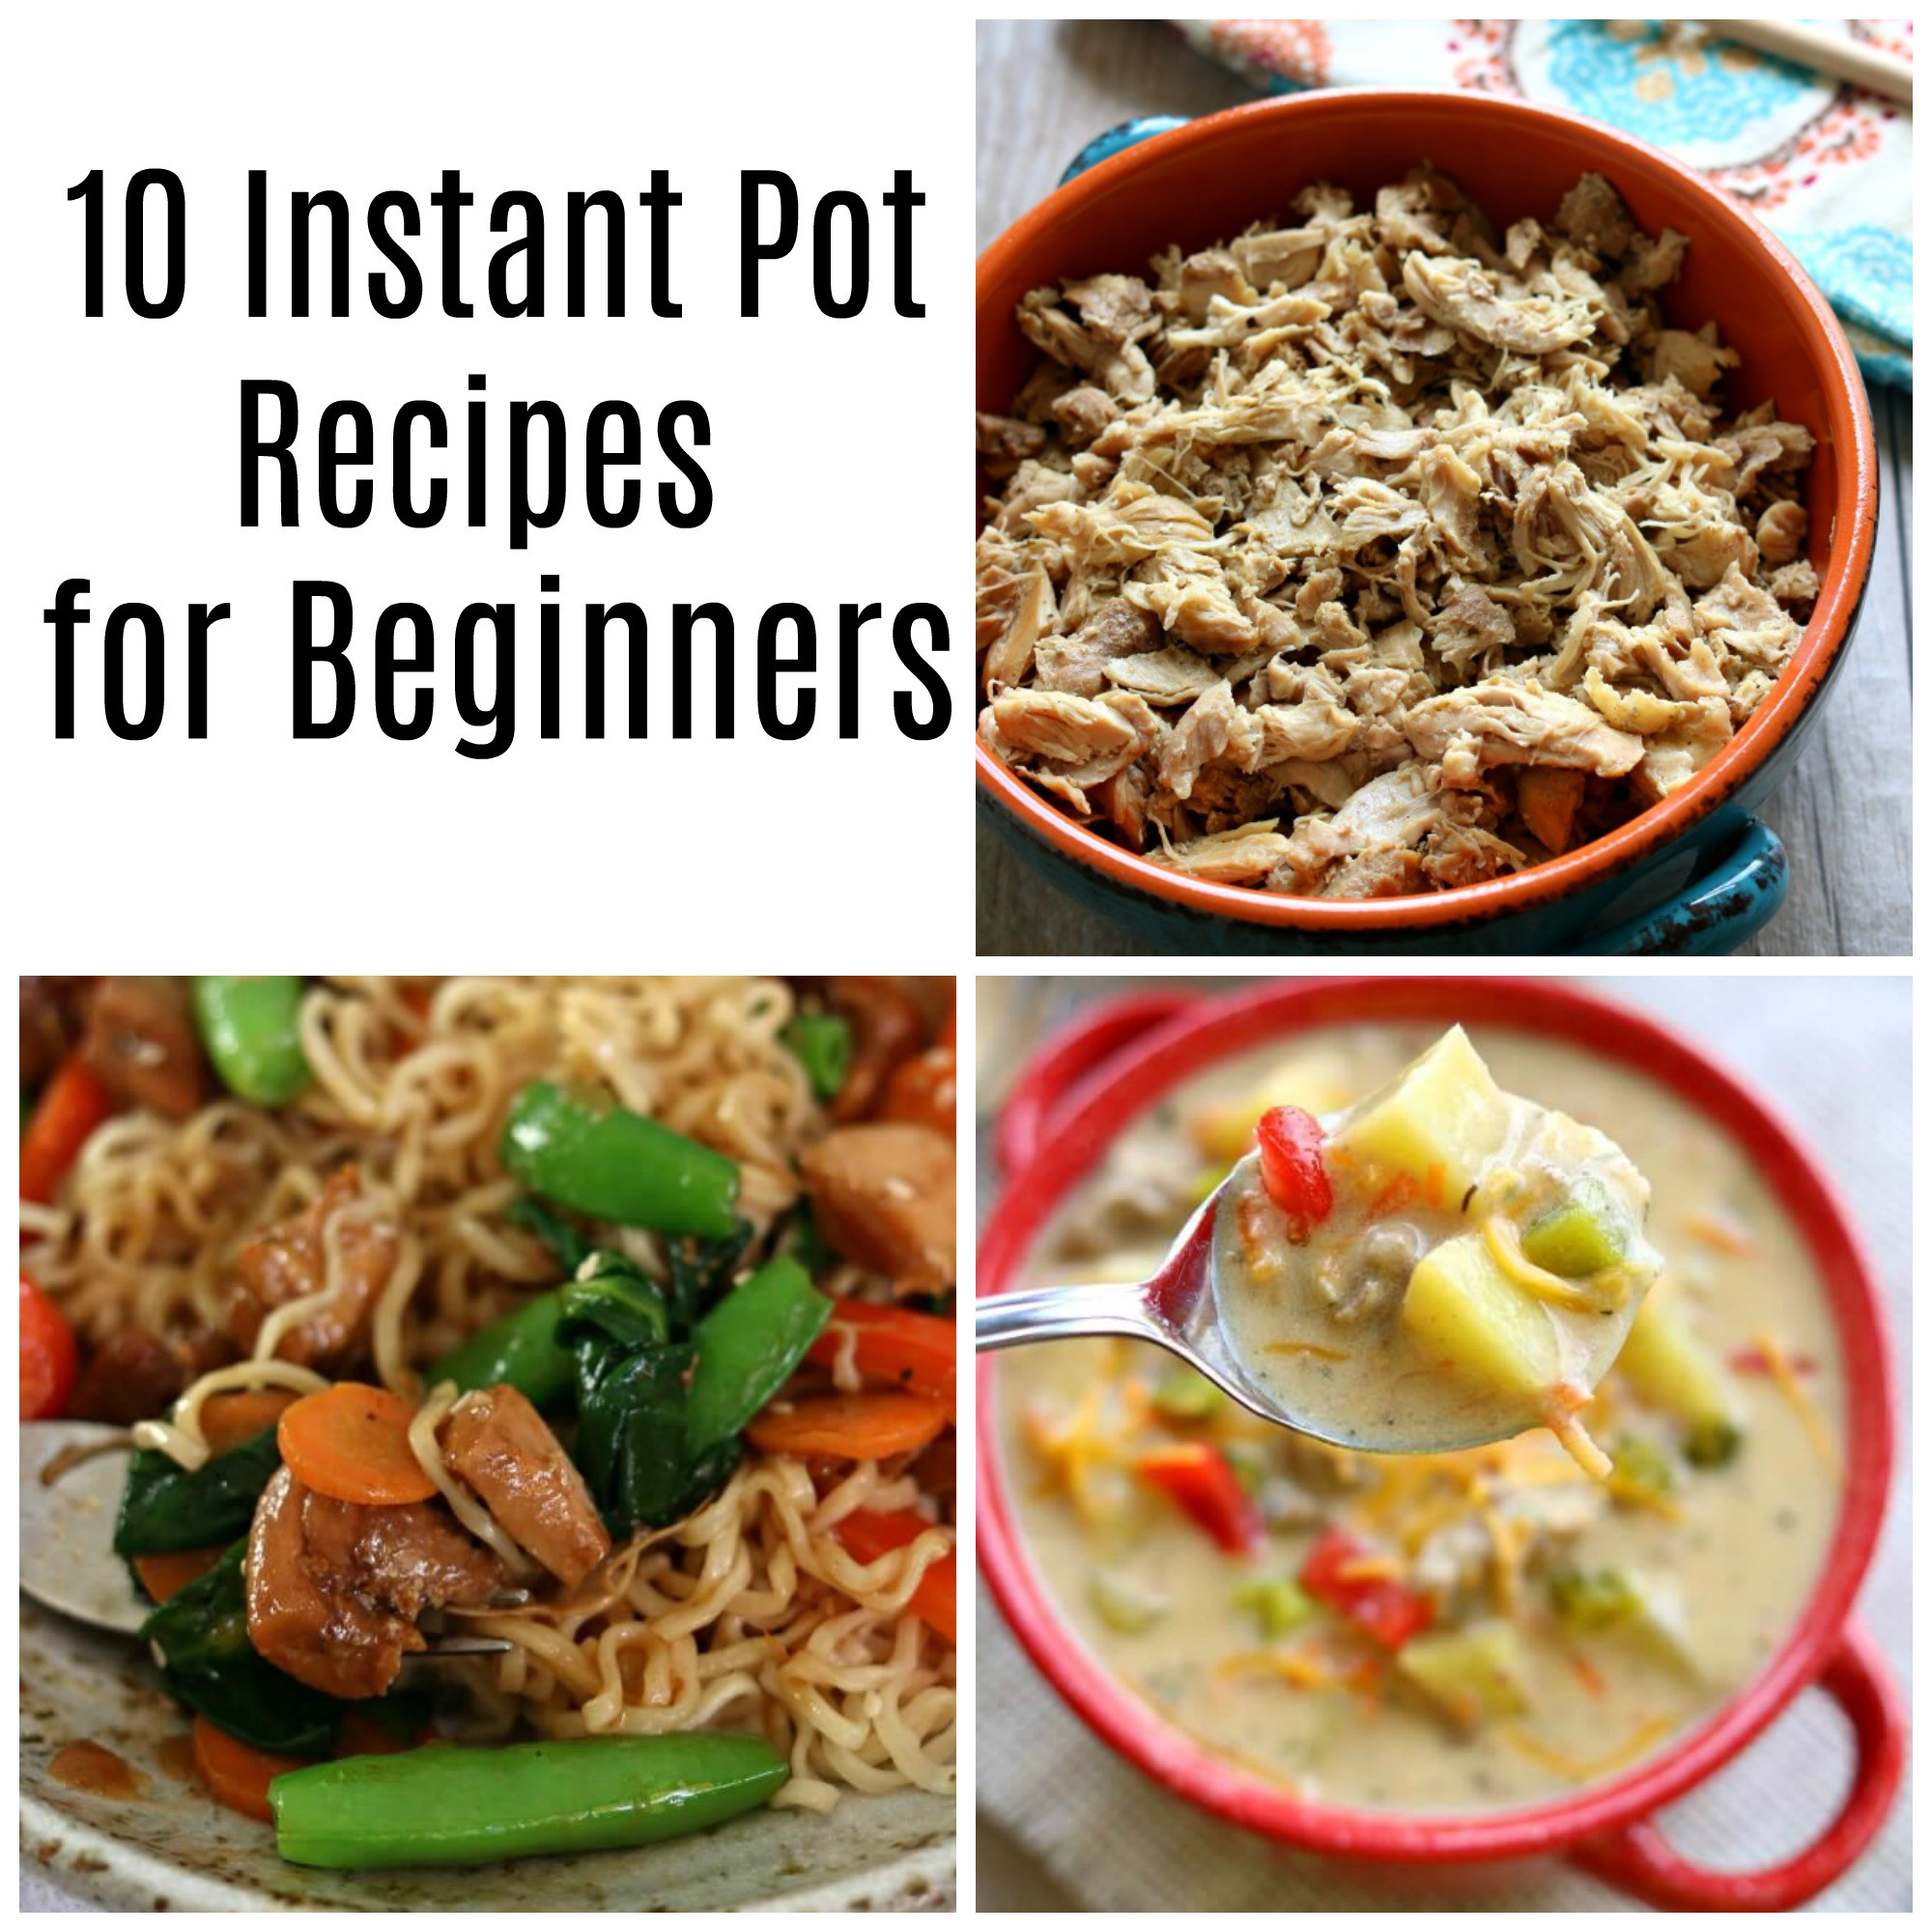 Pinterest Instant Pot Recipes Inspirational 10 Instant Pot Recipes for Beginners 365 Days Of Slow